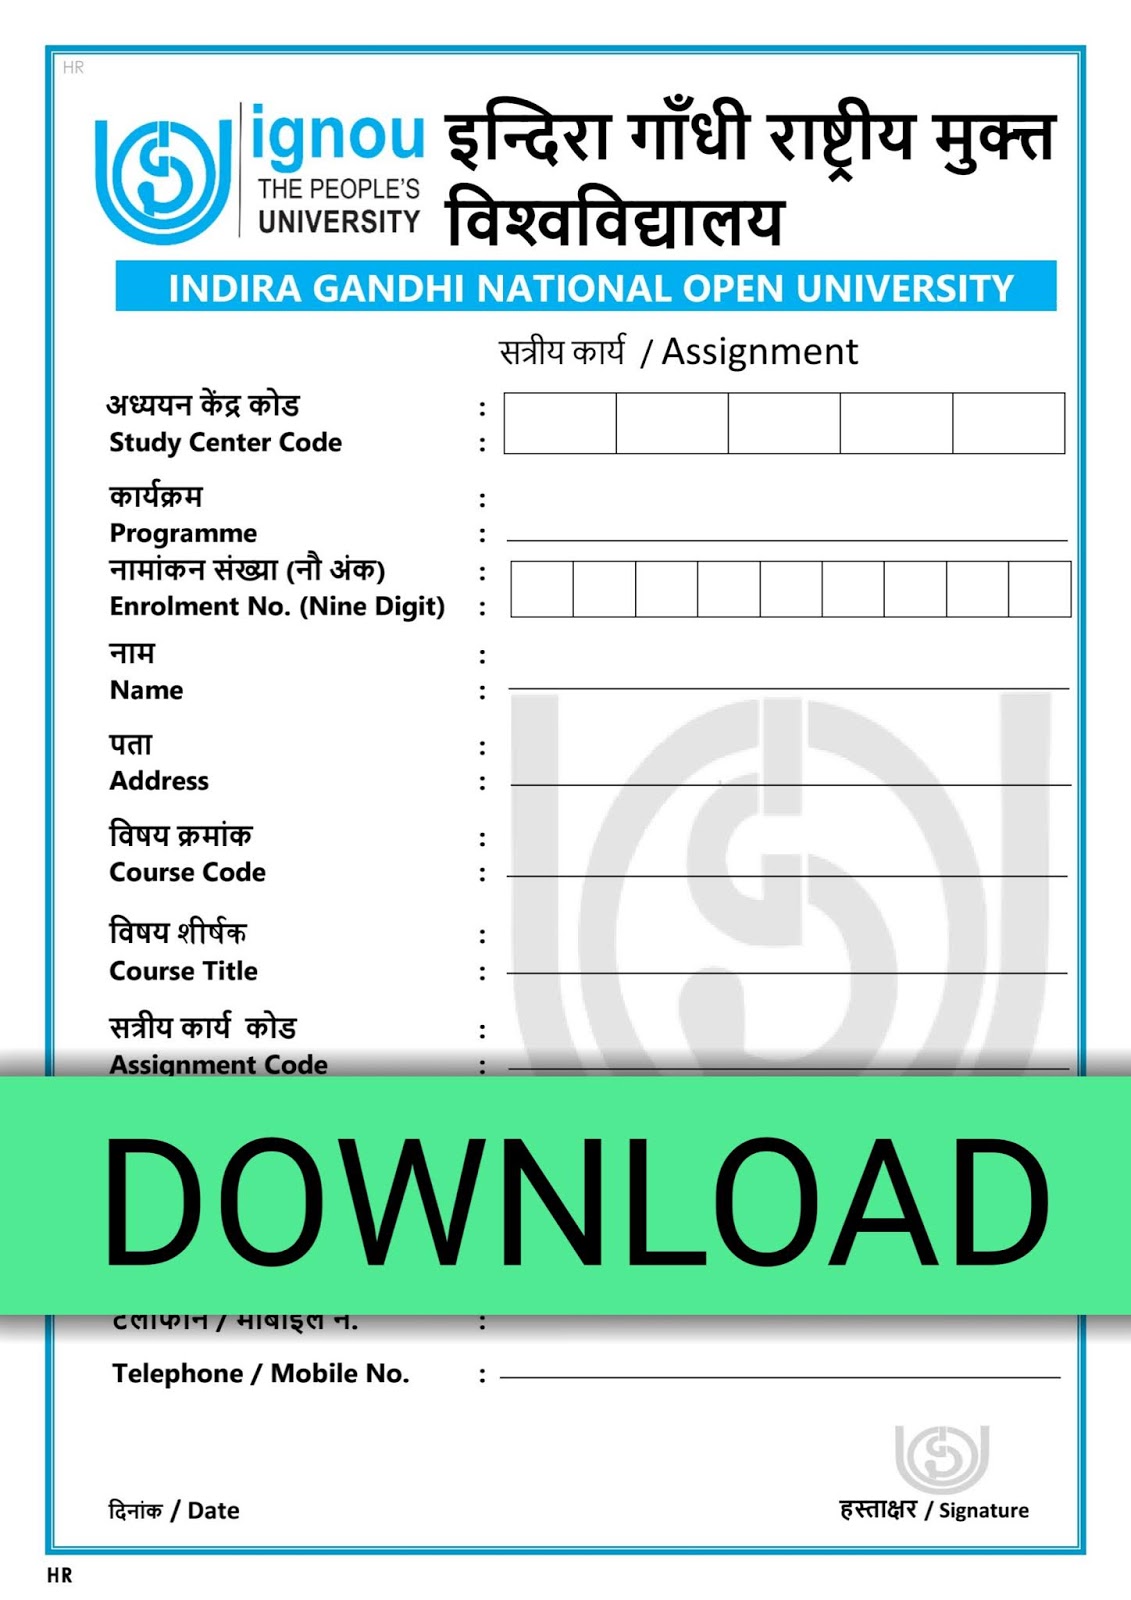 ignou assignment buy